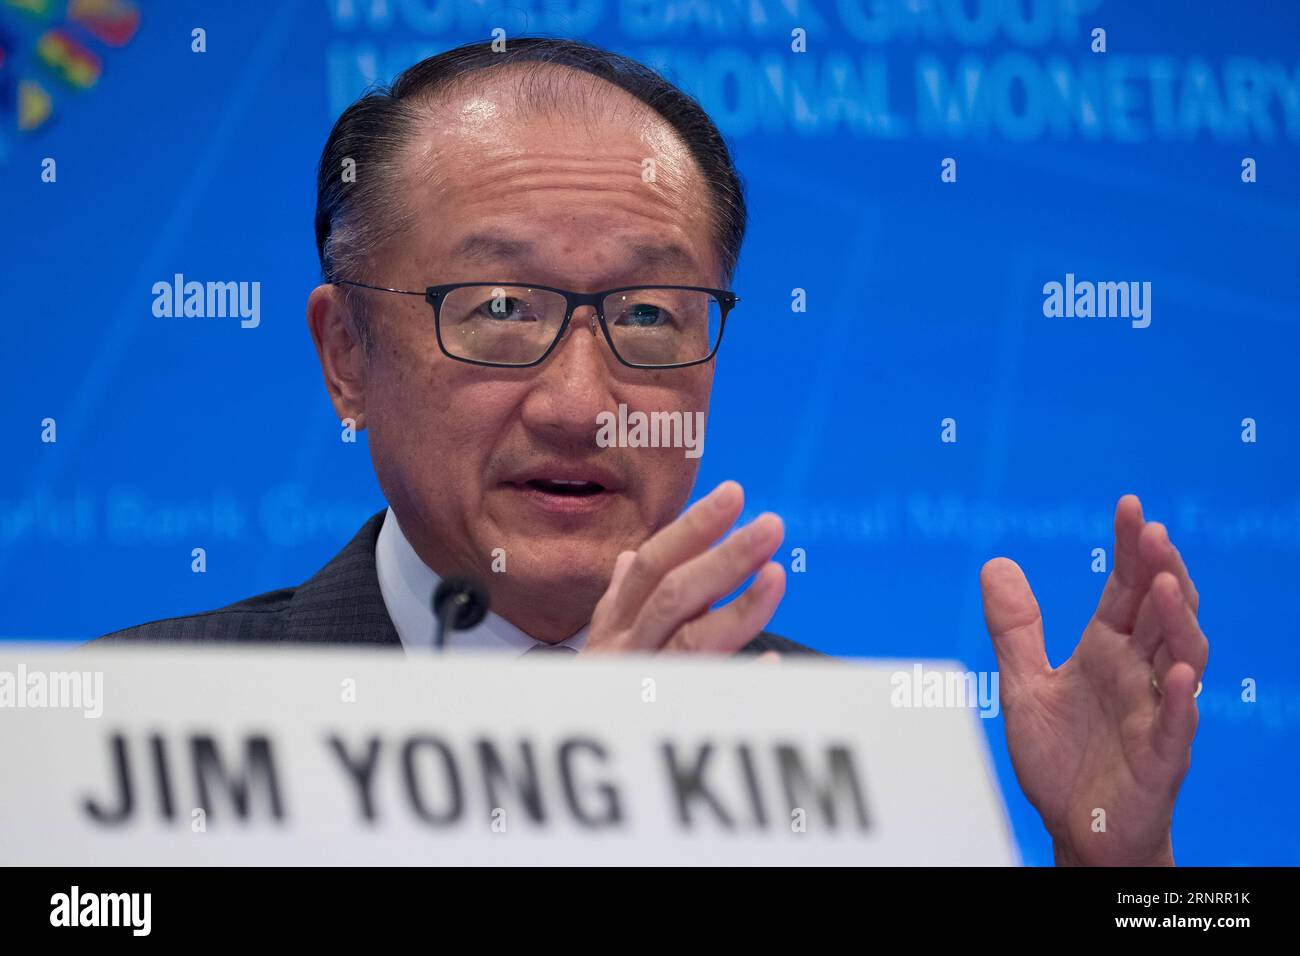 Jahrestagung von IWF und Weltbank in Washington (171012) -- WASHINGTON, Oct. 12, 2017 -- World Bank President Jim Yong Kim attends a press conference of the 2017 International Monetary Fund and World Bank annual meetings in Washington D.C., the United States, on Oct. 12, 2017. World Bank President Jim Yong Kim said on Thursday that China s effort to help 800 million people out of poverty is historic. ) U.S.-WASHINGTON D.C.-WORLD BANK-PRESIDENT-CHINA-POVERTY REDUCTION EFFORT TingxShen PUBLICATIONxNOTxINxCHN Stock Photo